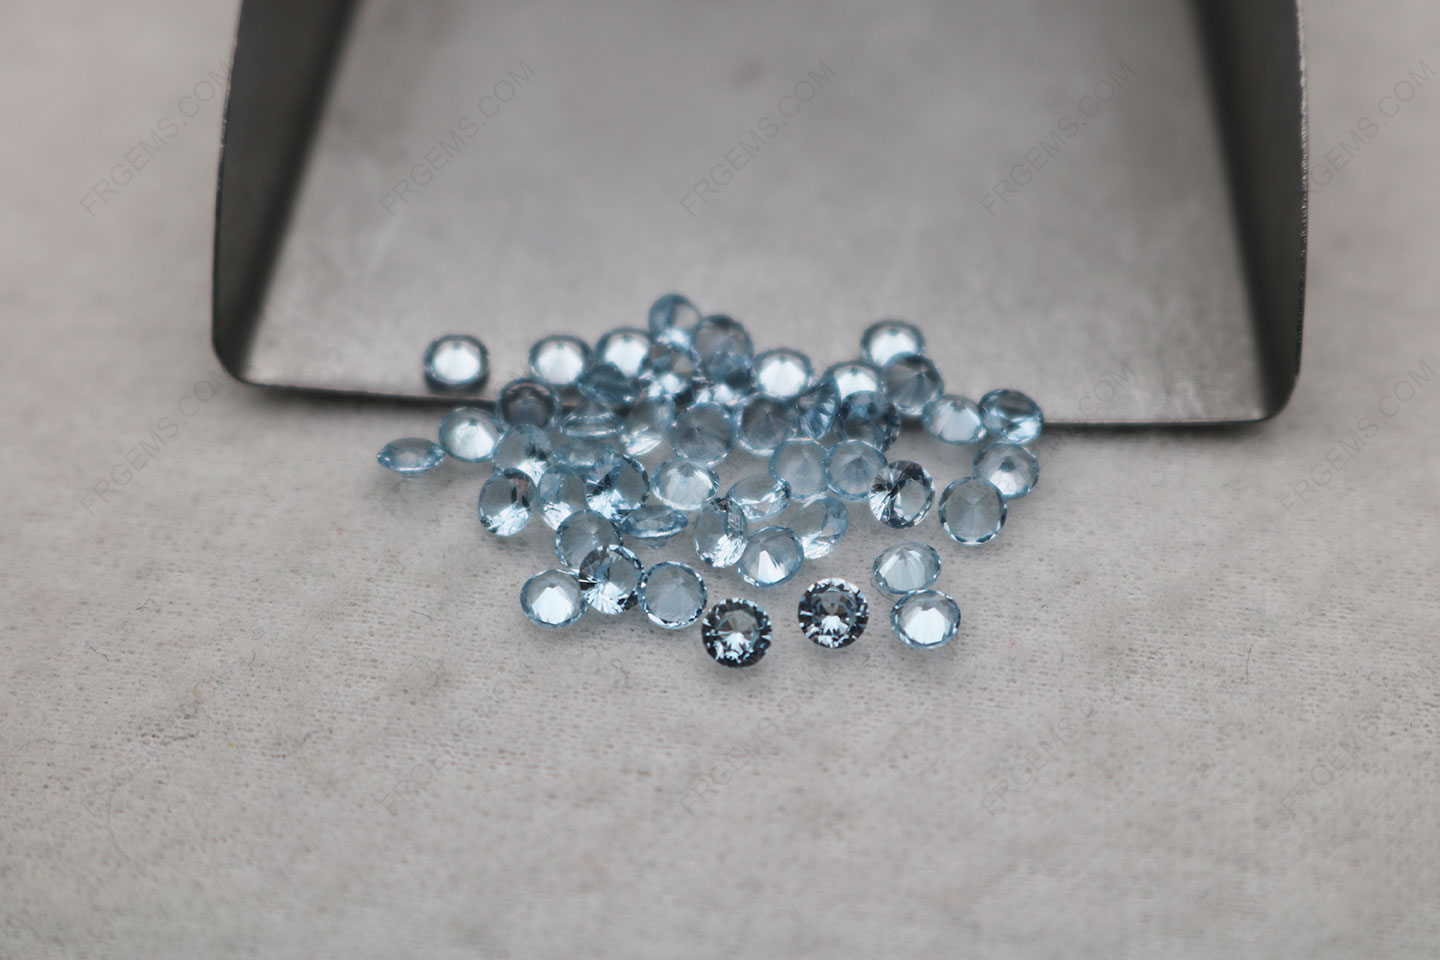 Synthetic Aquamarine Spinel #106 blue Round Faceted Cut 3mm gemstones